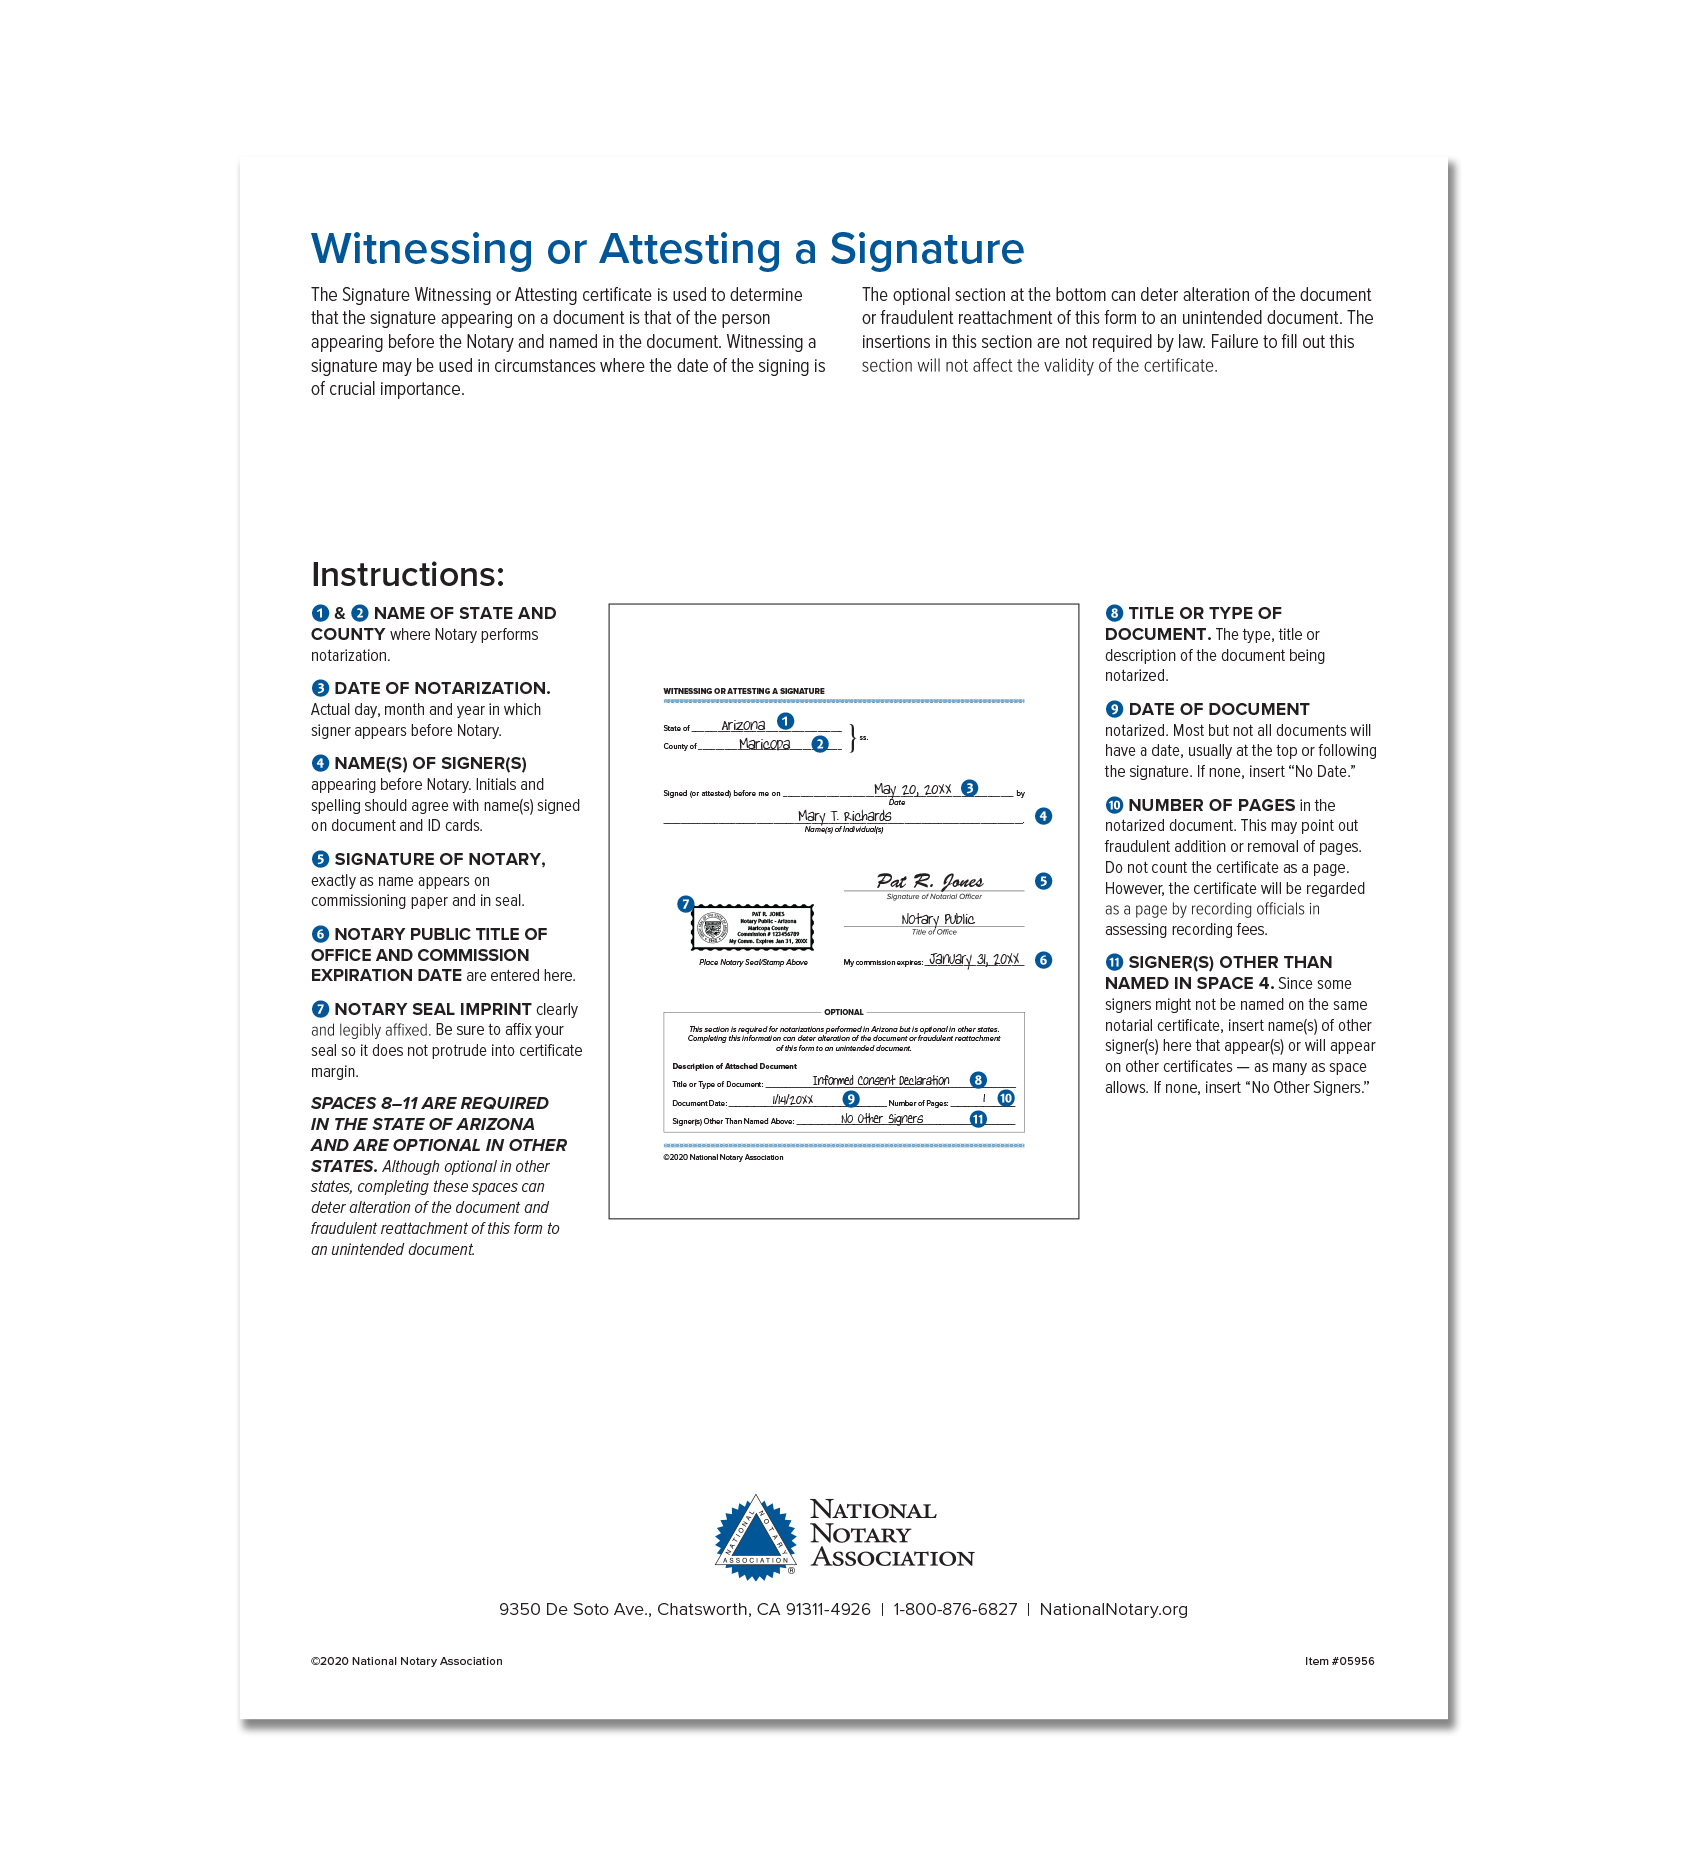 Witnessing or Attesting a Signature